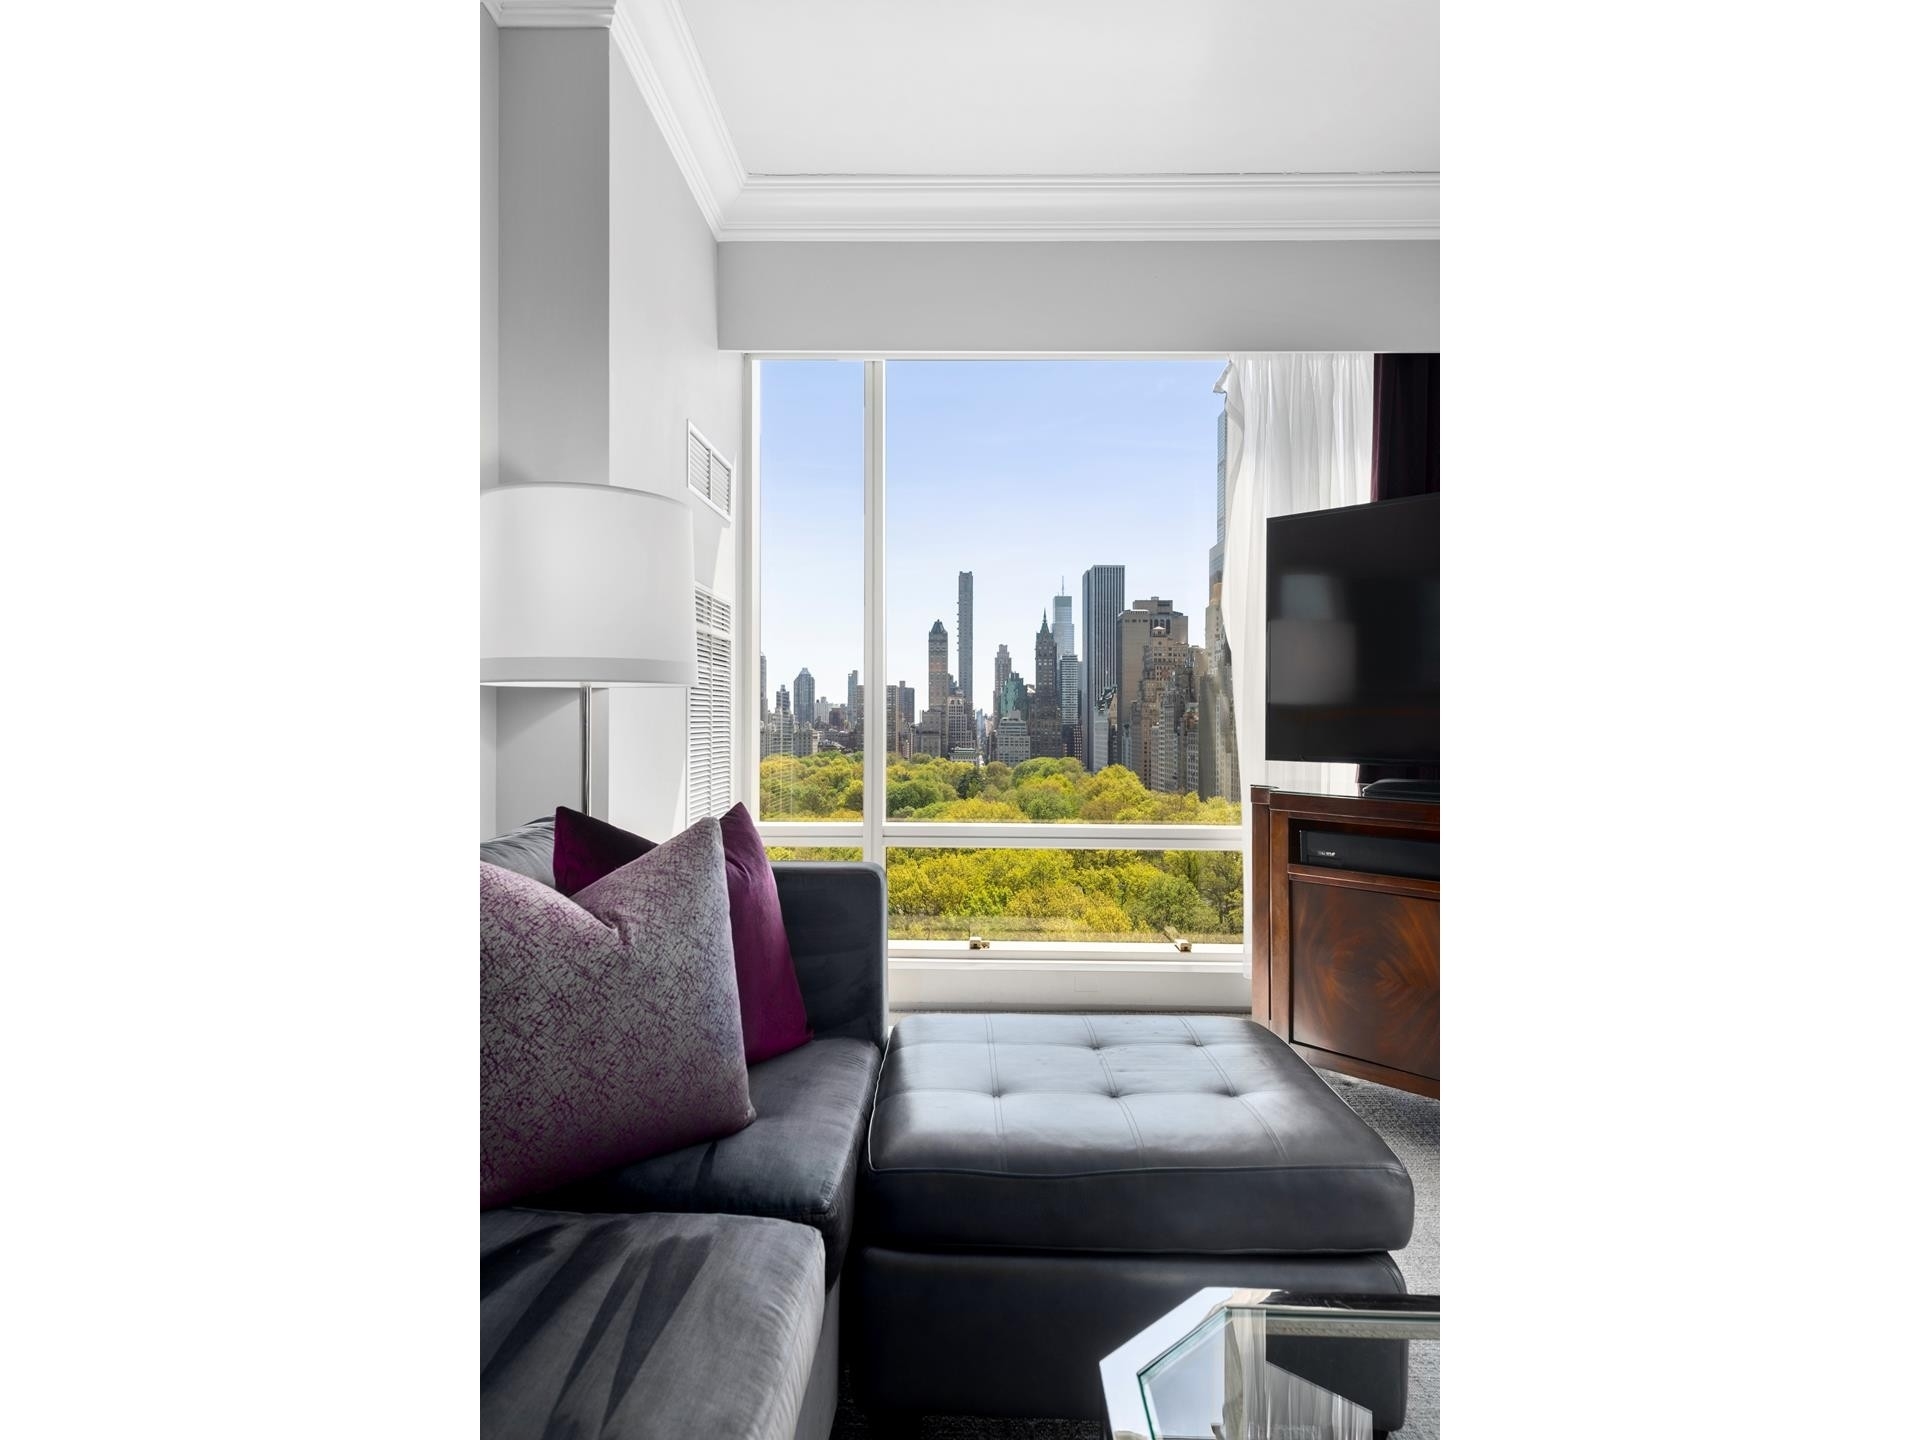 Property at One Central Park West, 1 CENTRAL PARK W, 1210 Lincoln Square, New York, New York 10023